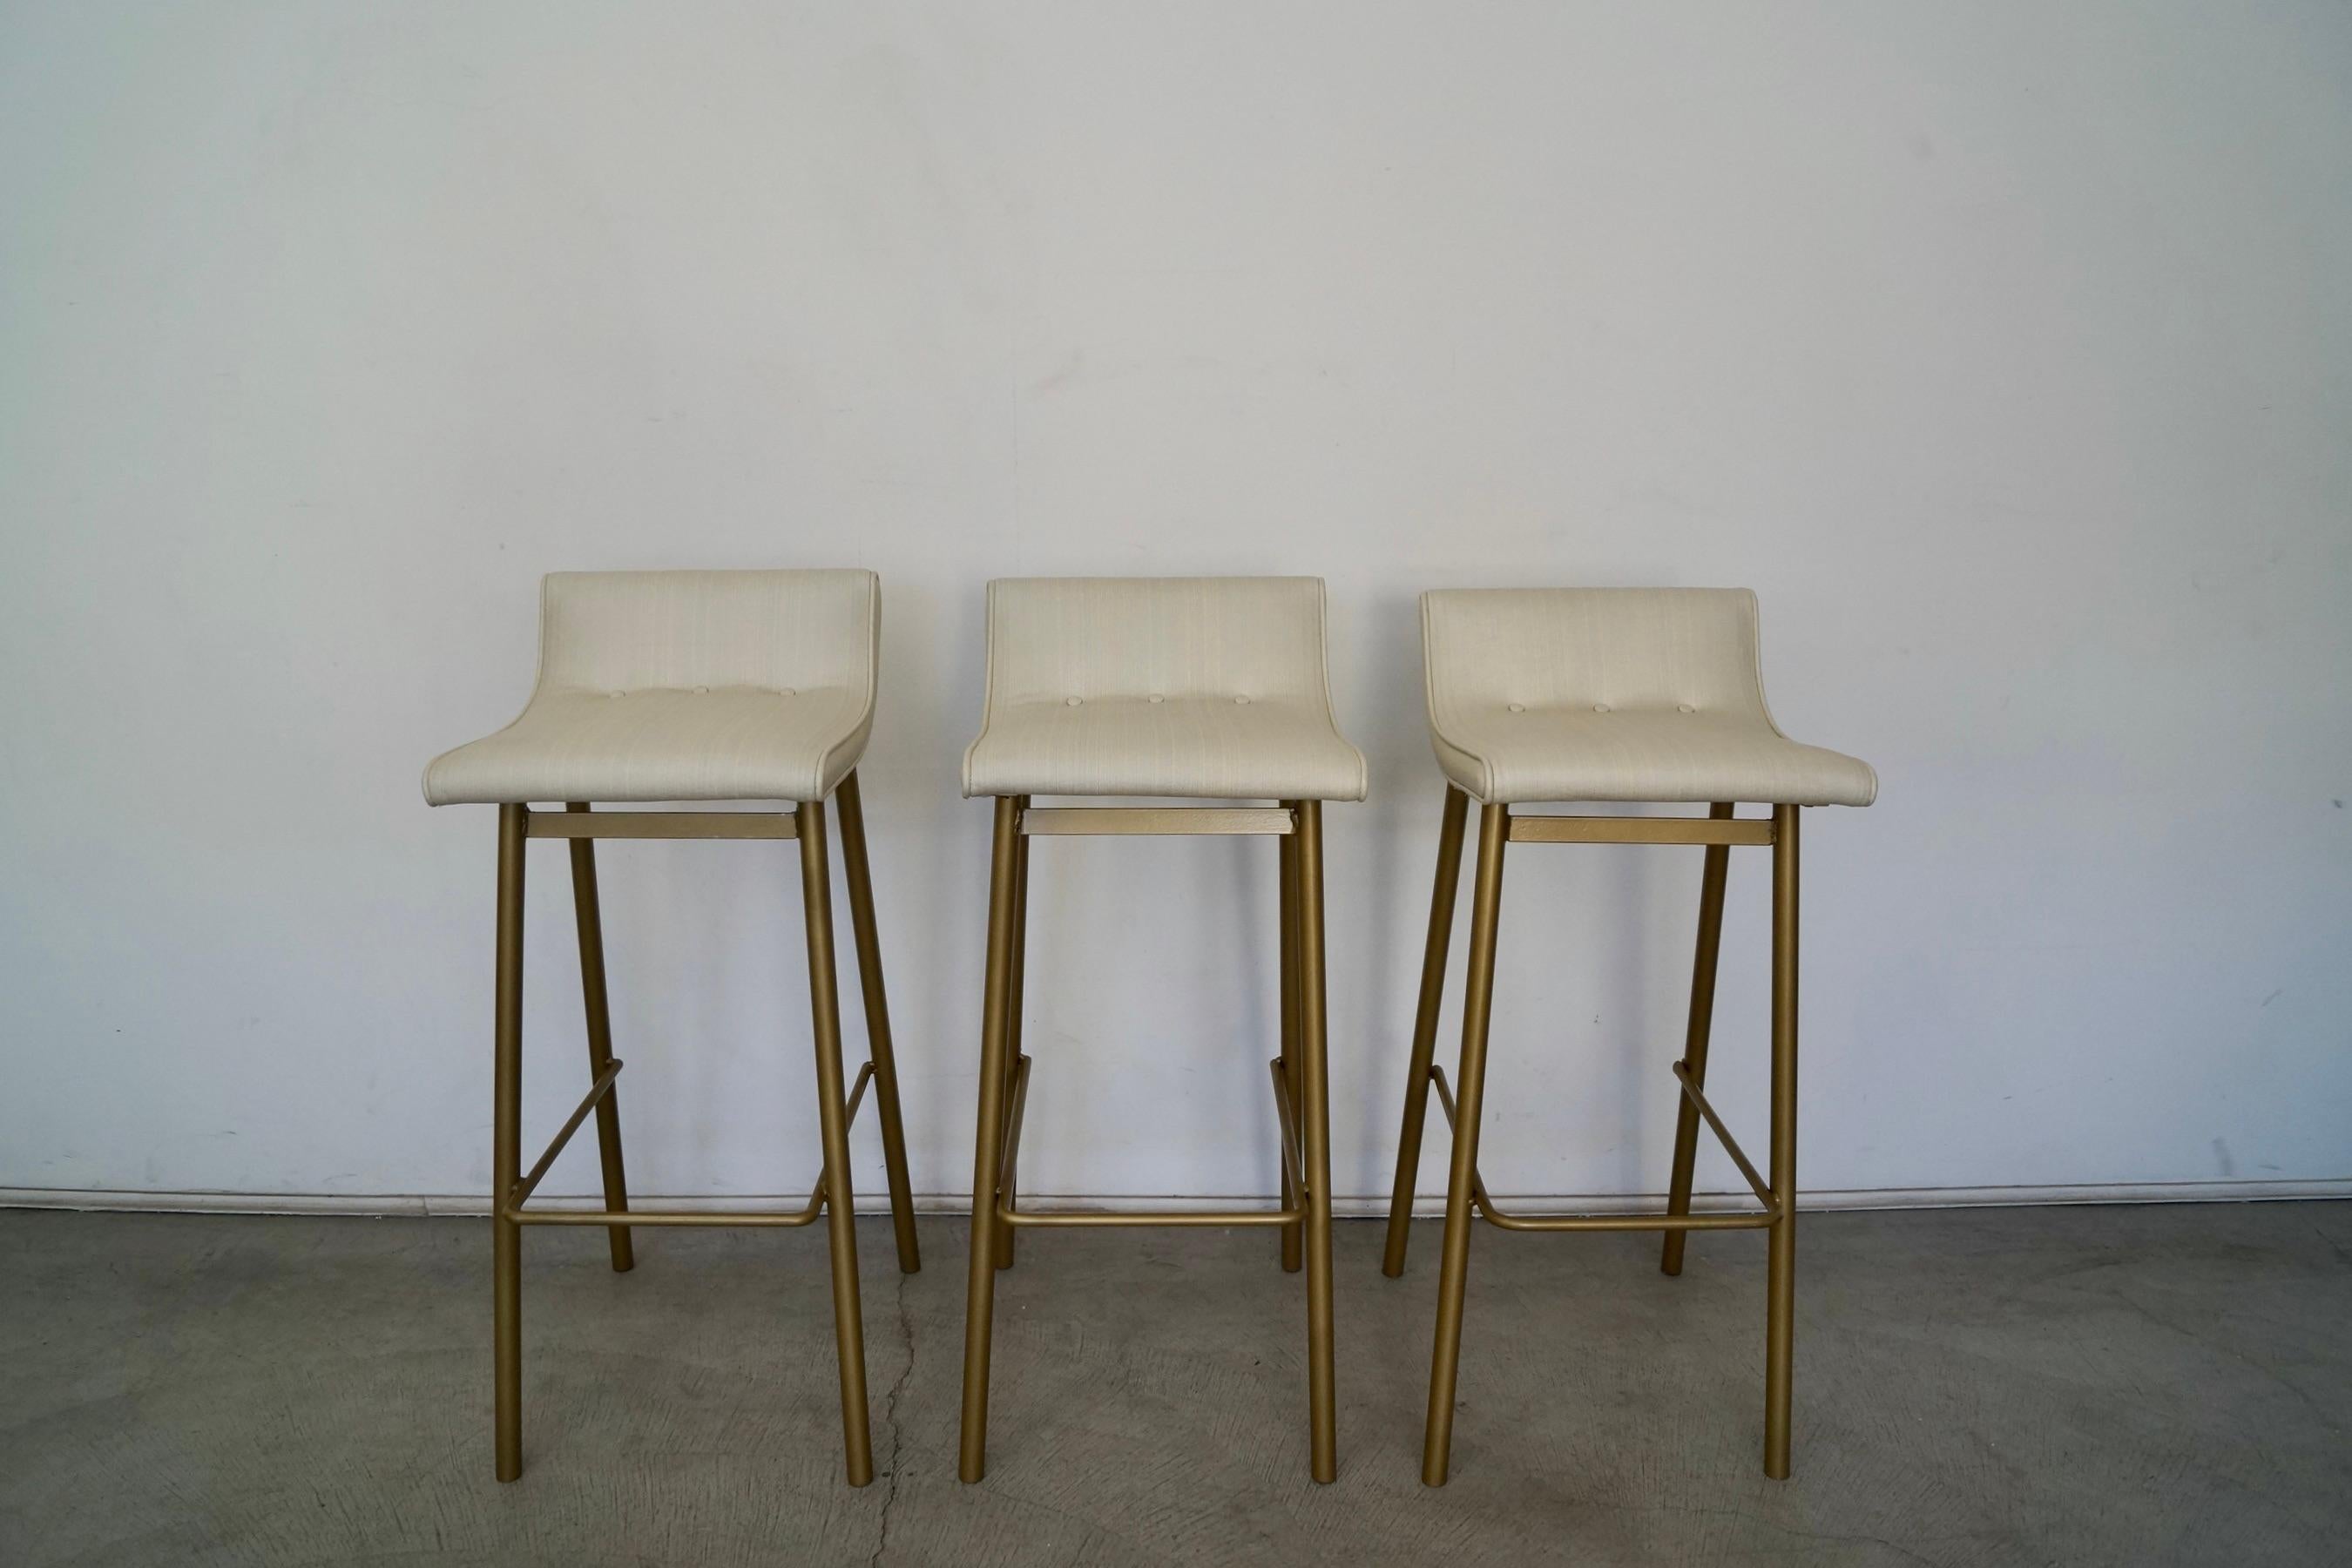 American 1950's Mid-Century Modern Bar Stools by Vista of California - Set of Three For Sale